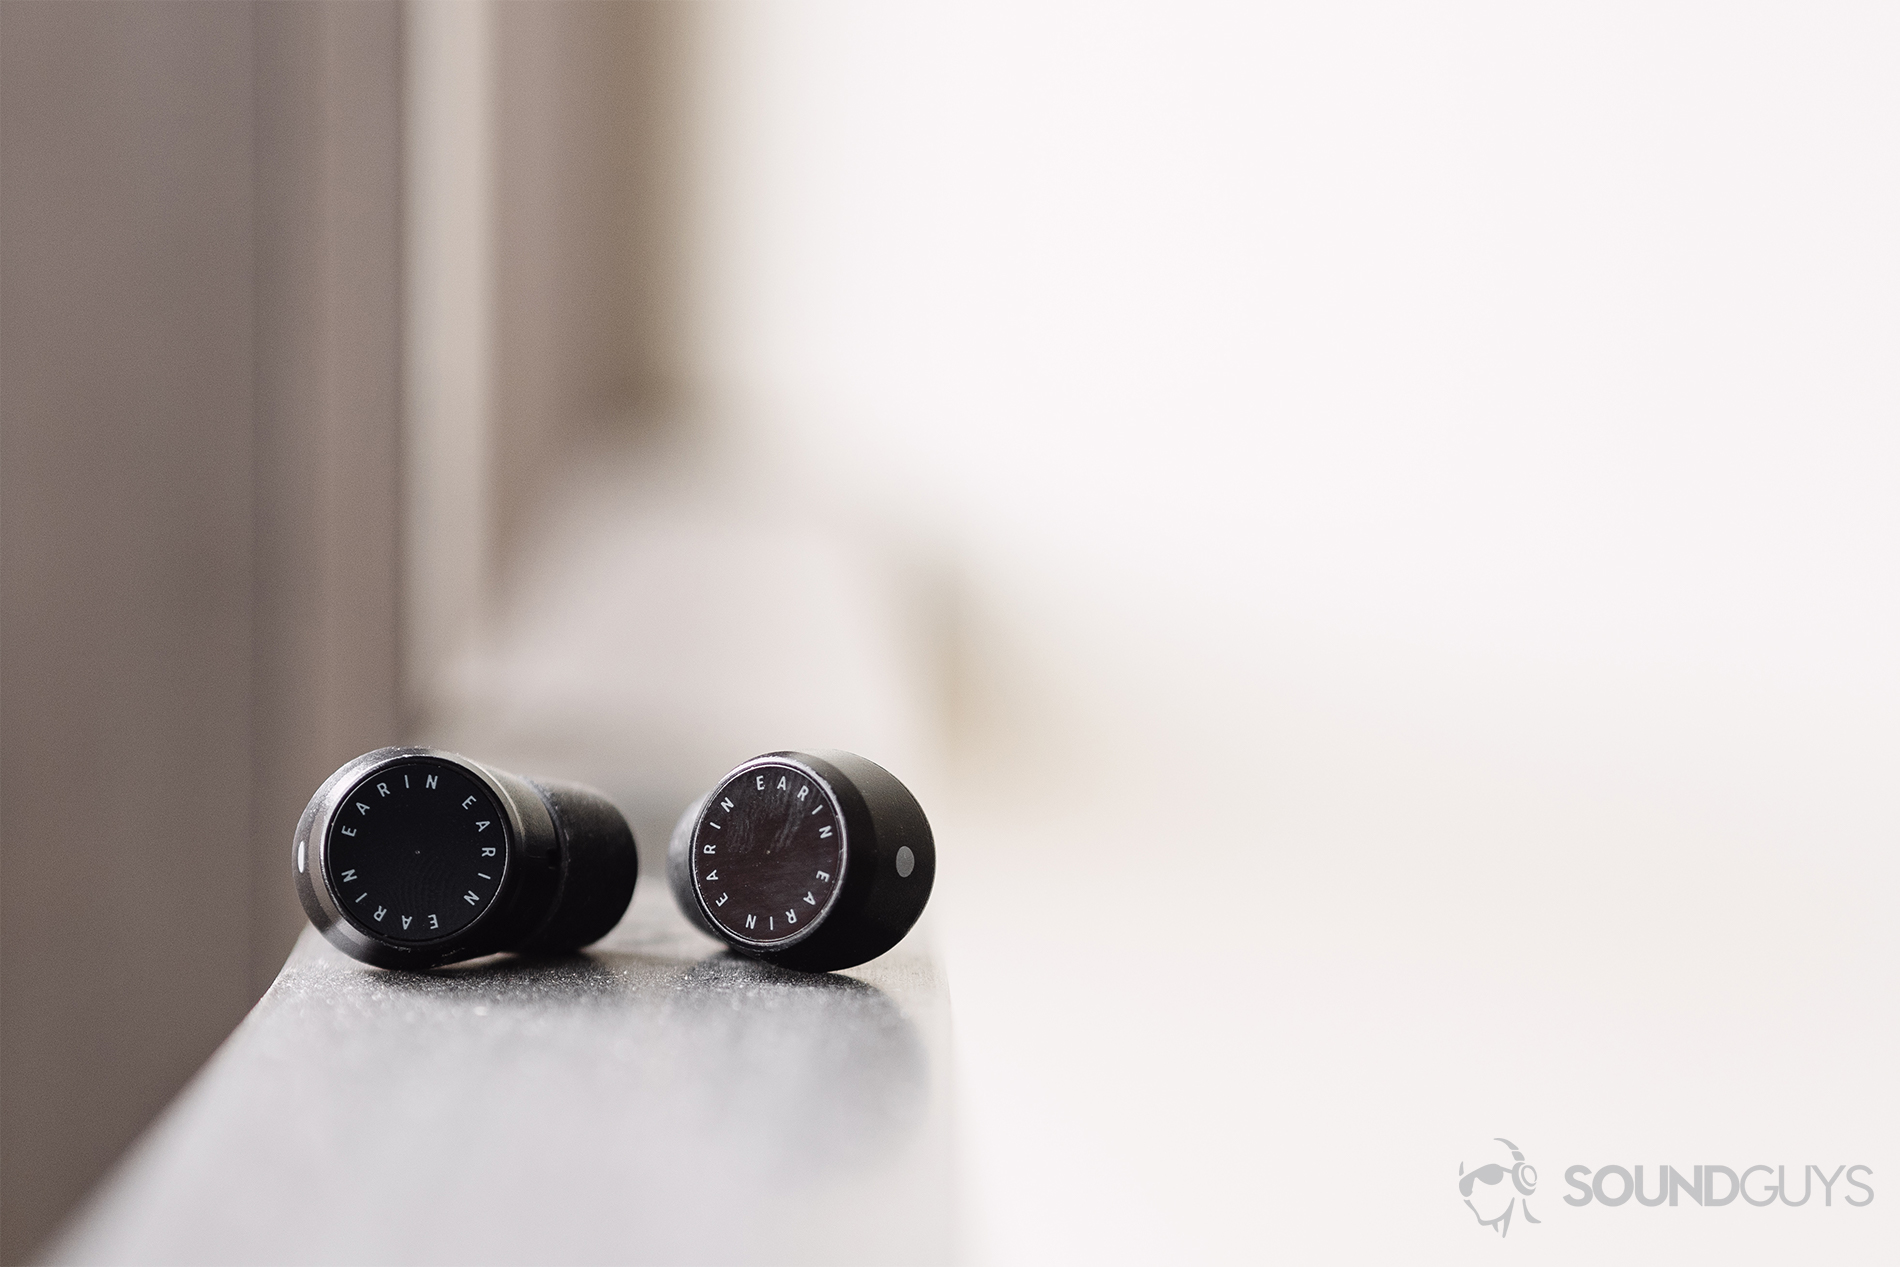 Earin M-2 review: The true wireless earbuds on a railing